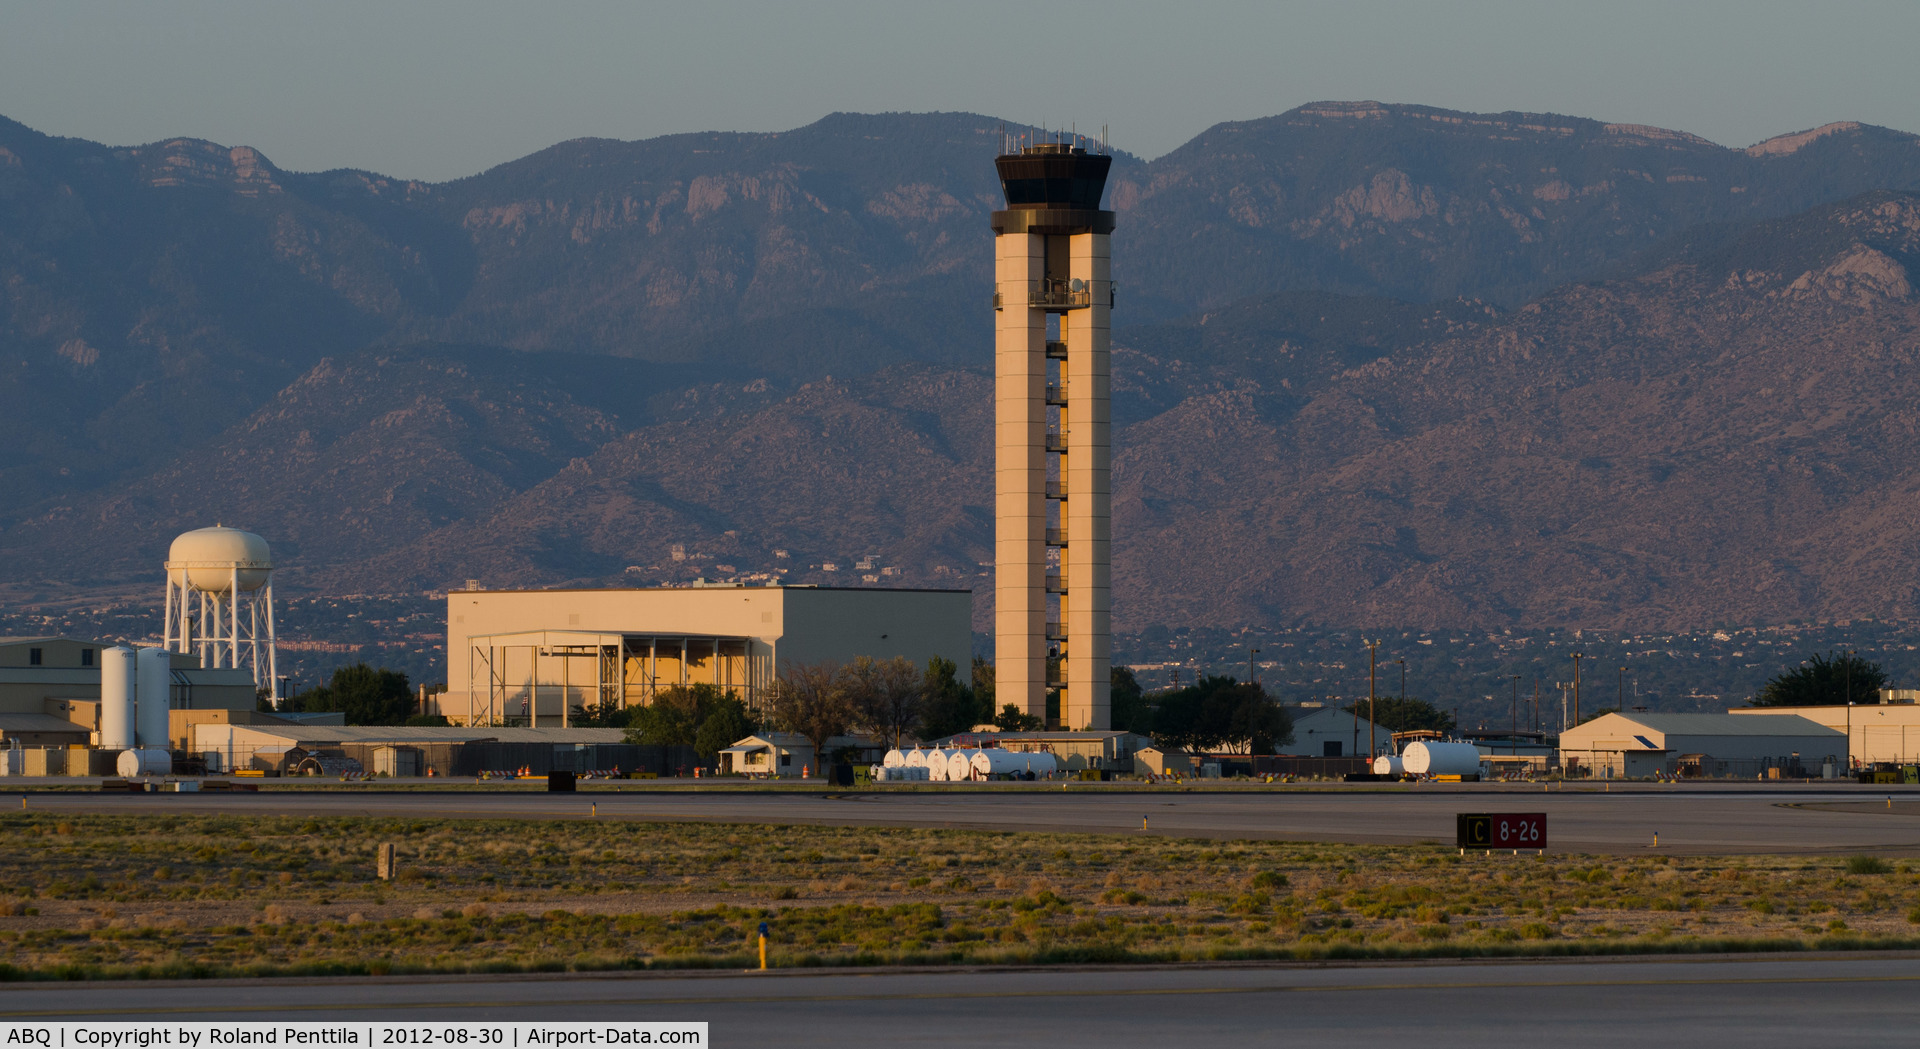 Albuquerque International Sunport Airport (ABQ) - The control tower at evening.  The tower controls both domestic and military operations as this airport is jointly used by Kirtland Air Force Base.